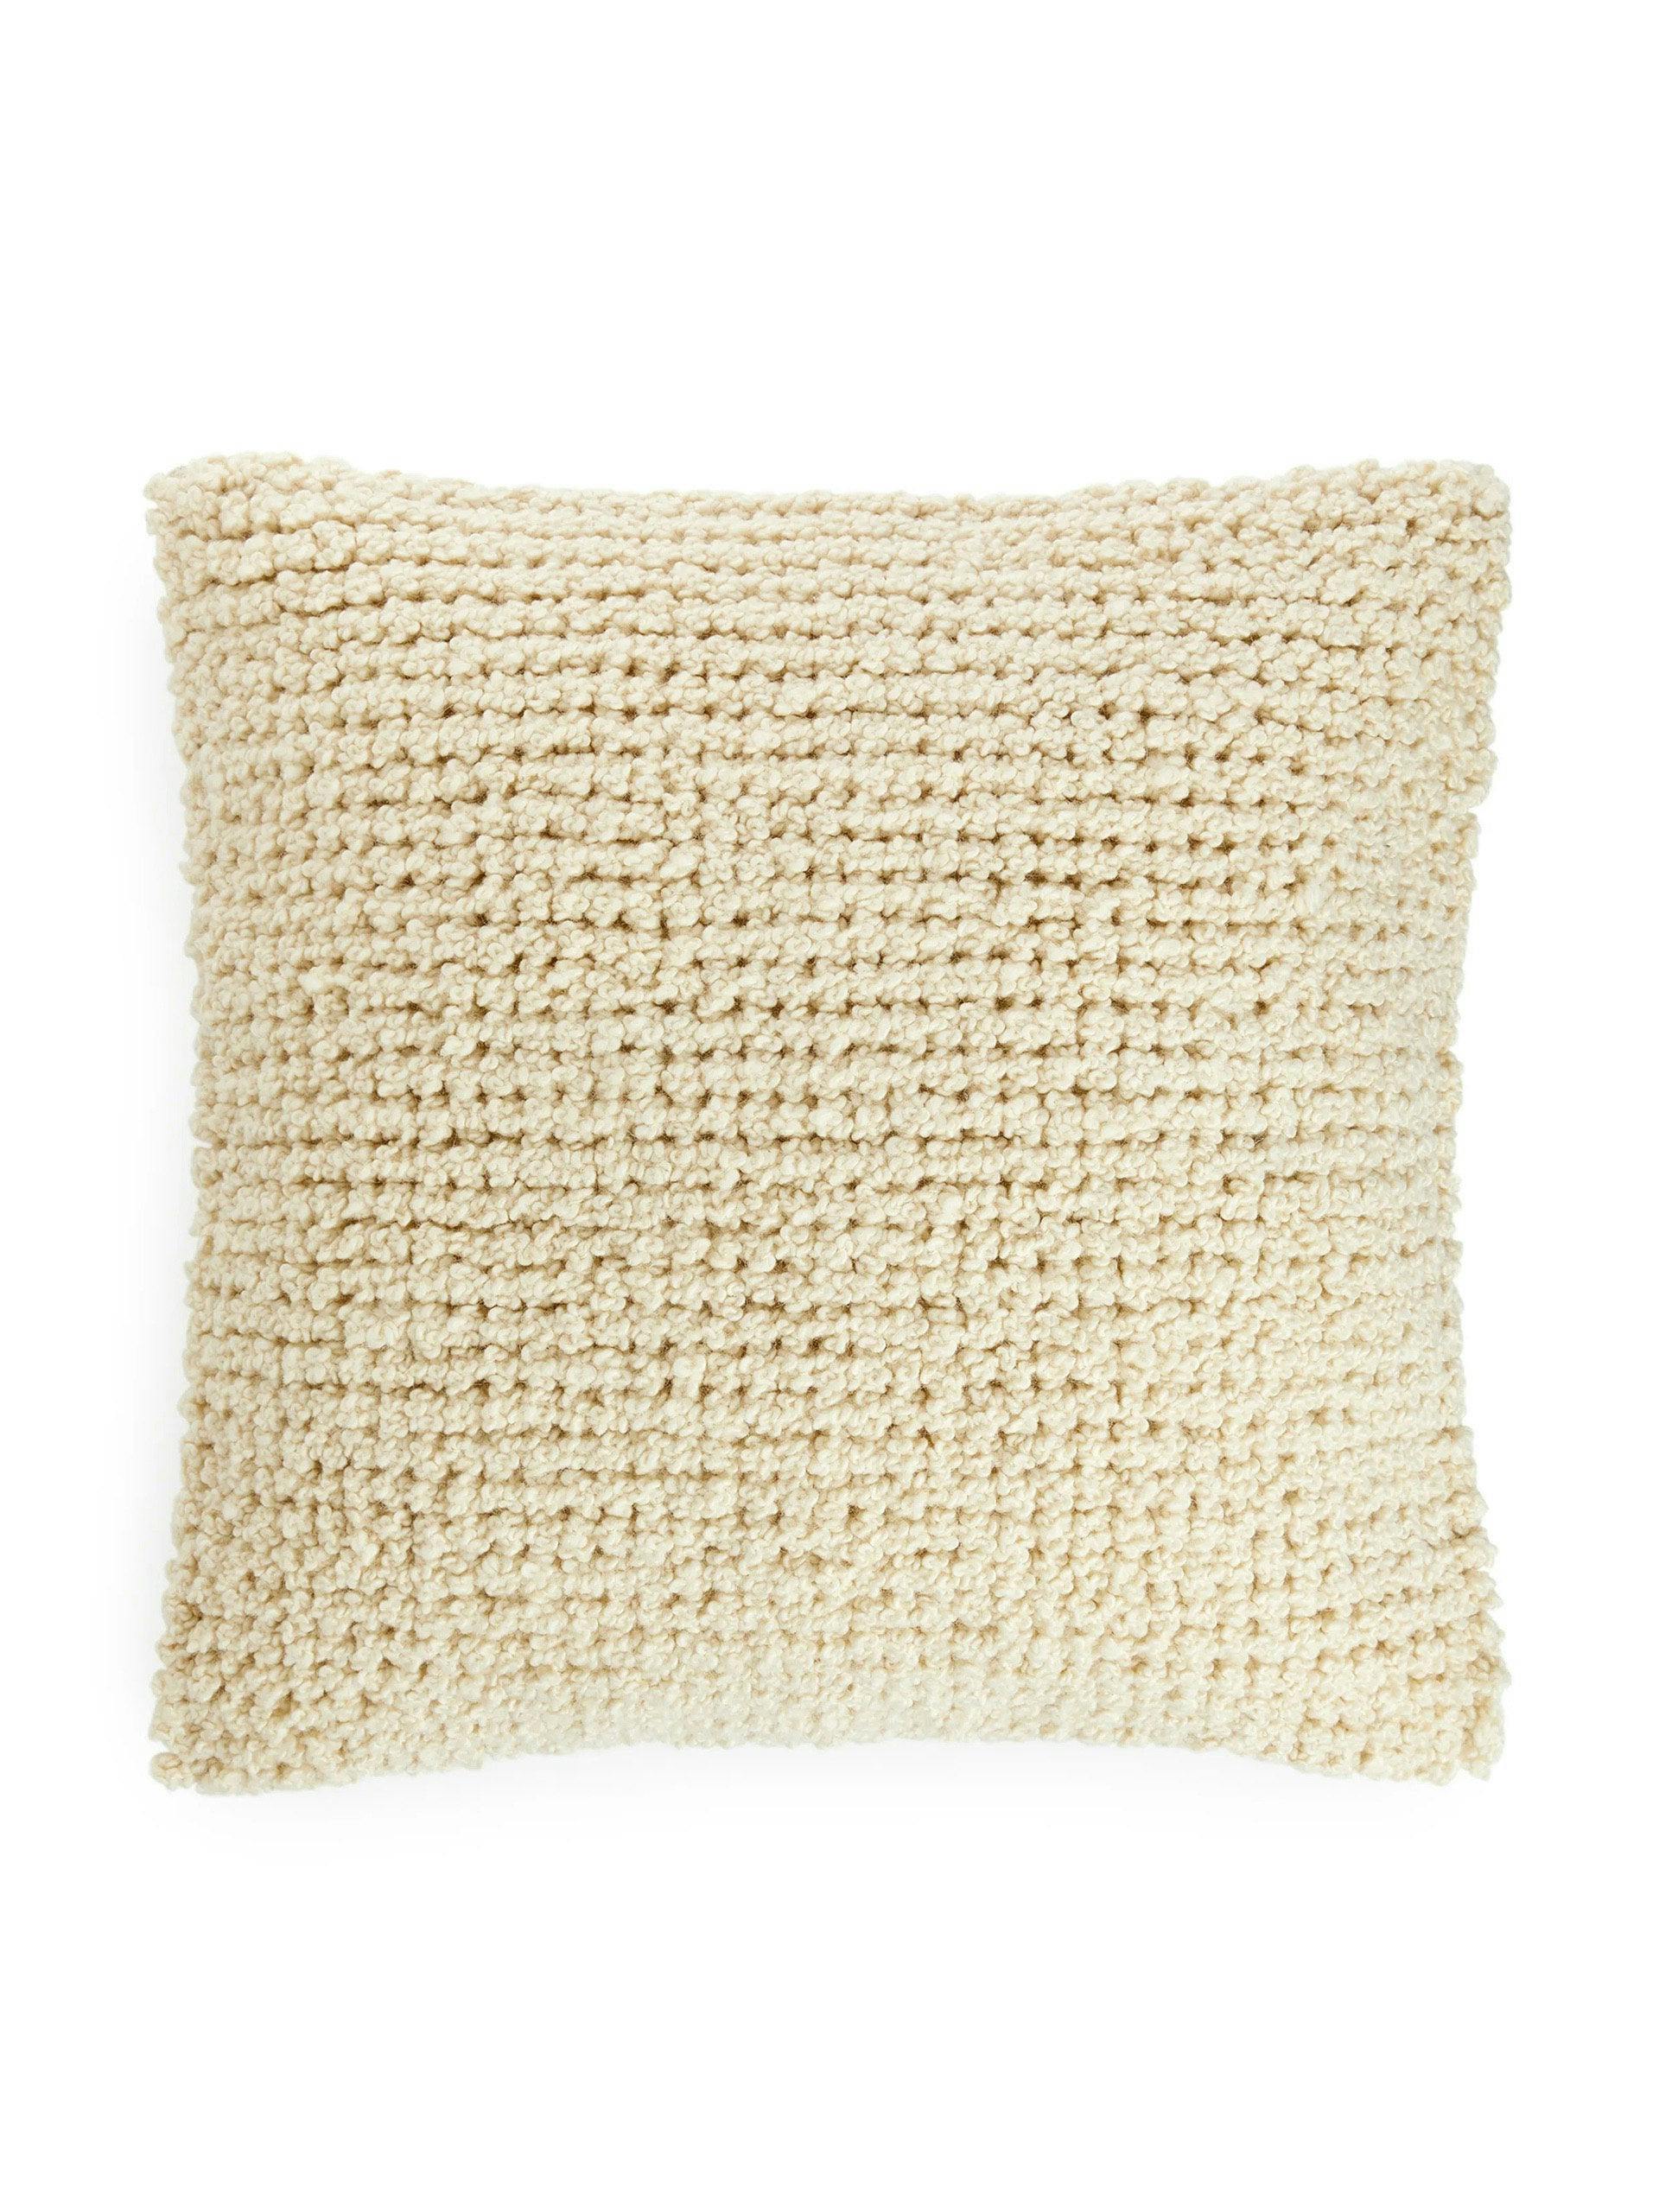 Wool and linen cushion cover